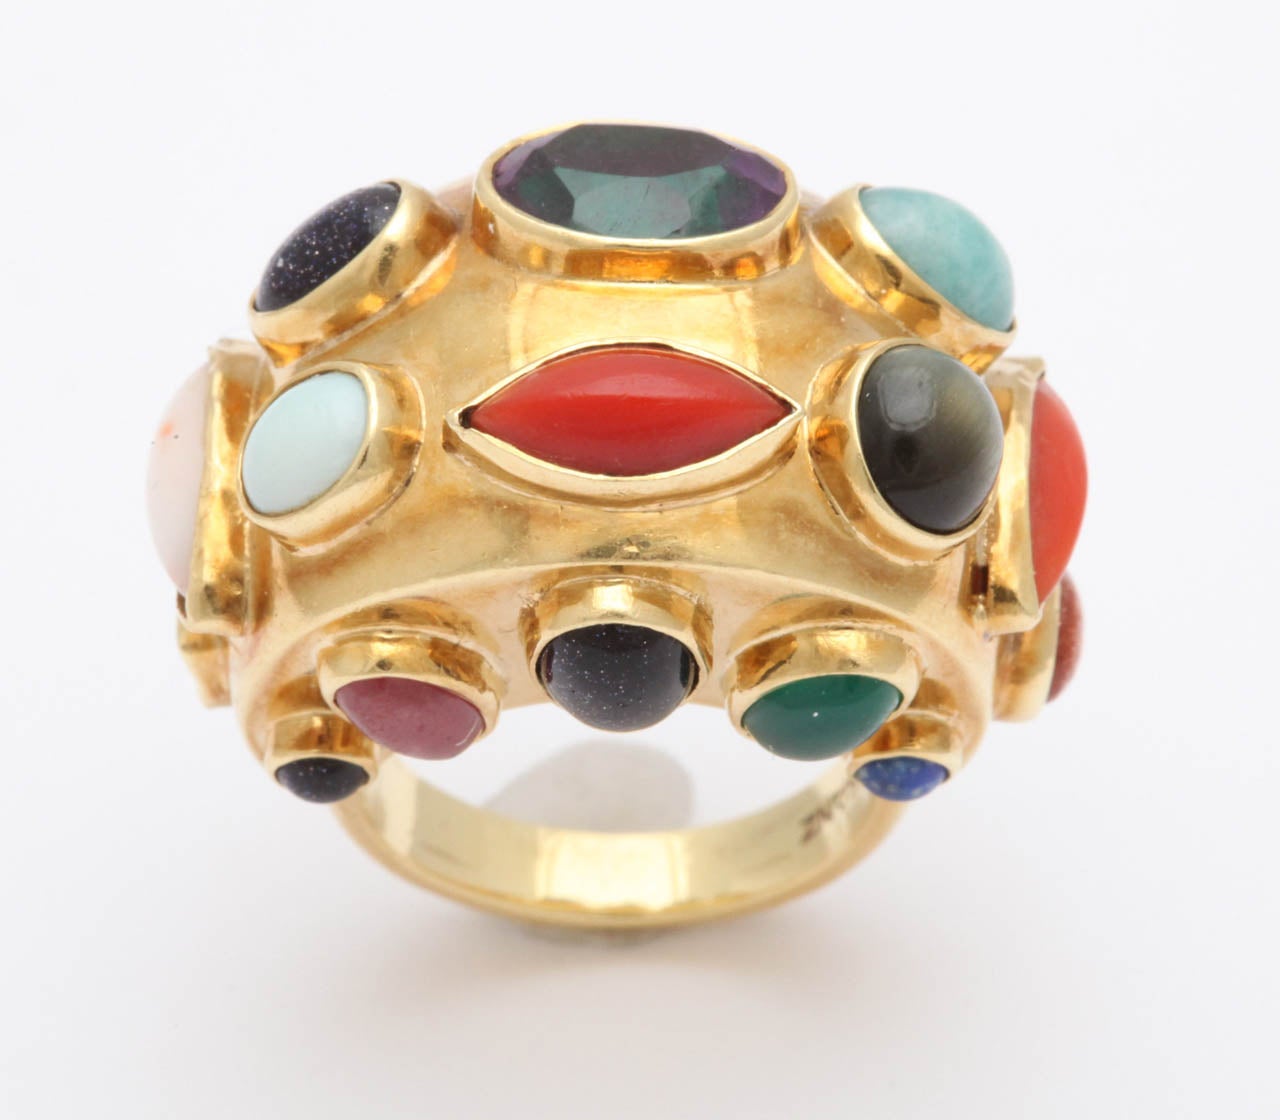 18kt yellow gold multicolored stone ring comprised of coral, turquoise ,amethyst,goldstone and green onyx semi precious stones made in spain deigned by SAENZ